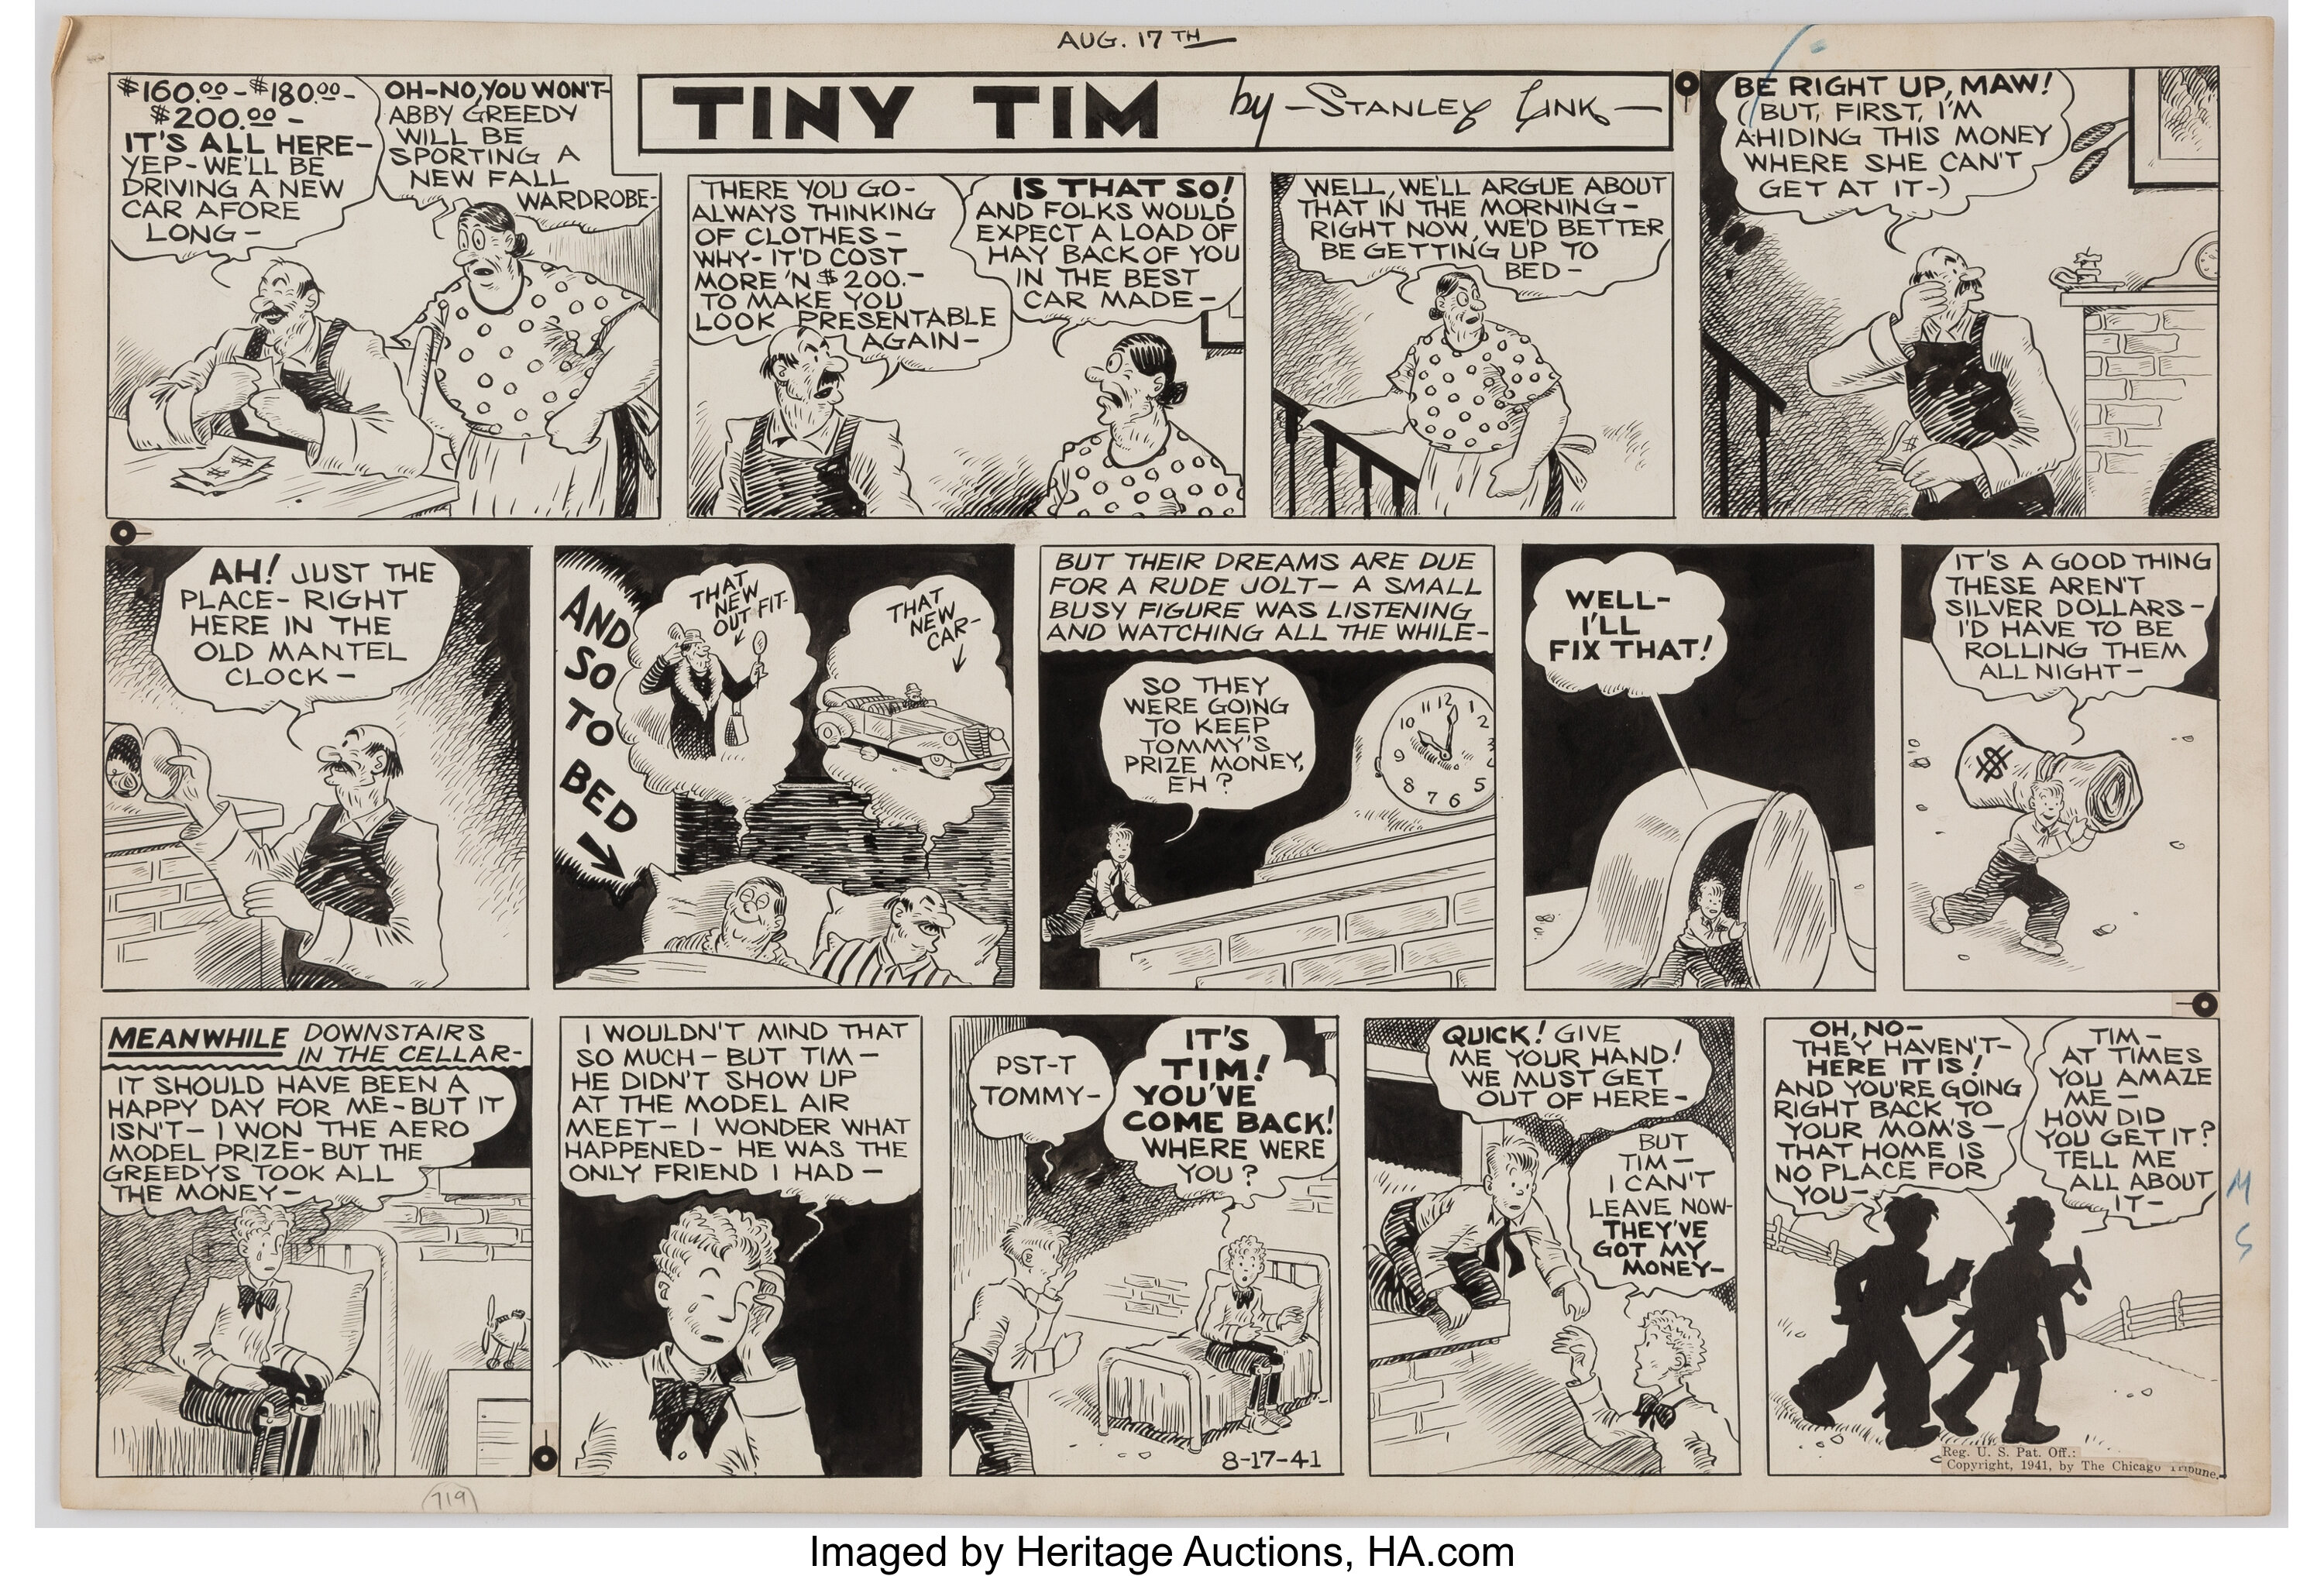 TH10 TINY TIM by Stanley Link Lot of 3 Sunday Tabloid Half Page